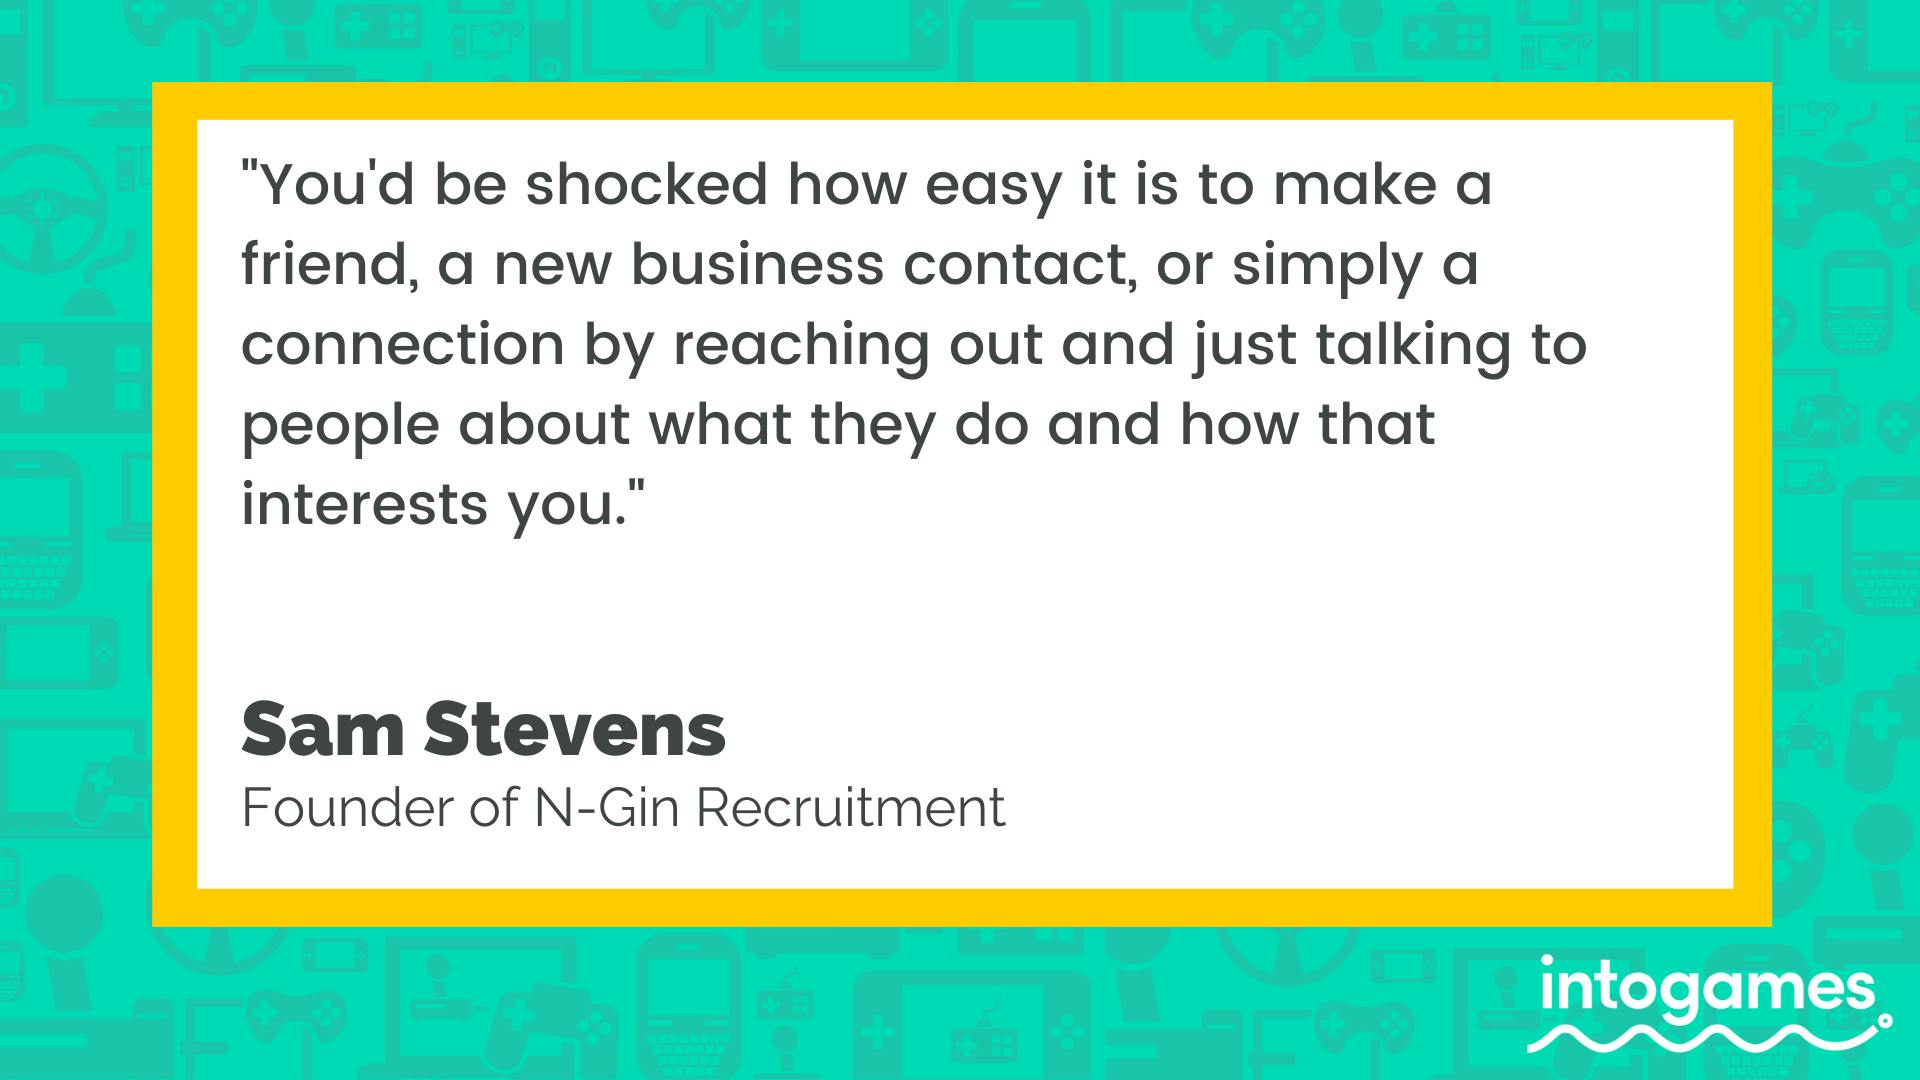 "You'd be shocked how easy it is to make a friend, a new business contract, or simply a connection by reaching out and just talking to people about what they do and how that interests you." - Sam Stevens, Founder of N-Gin Recruitment.  around 